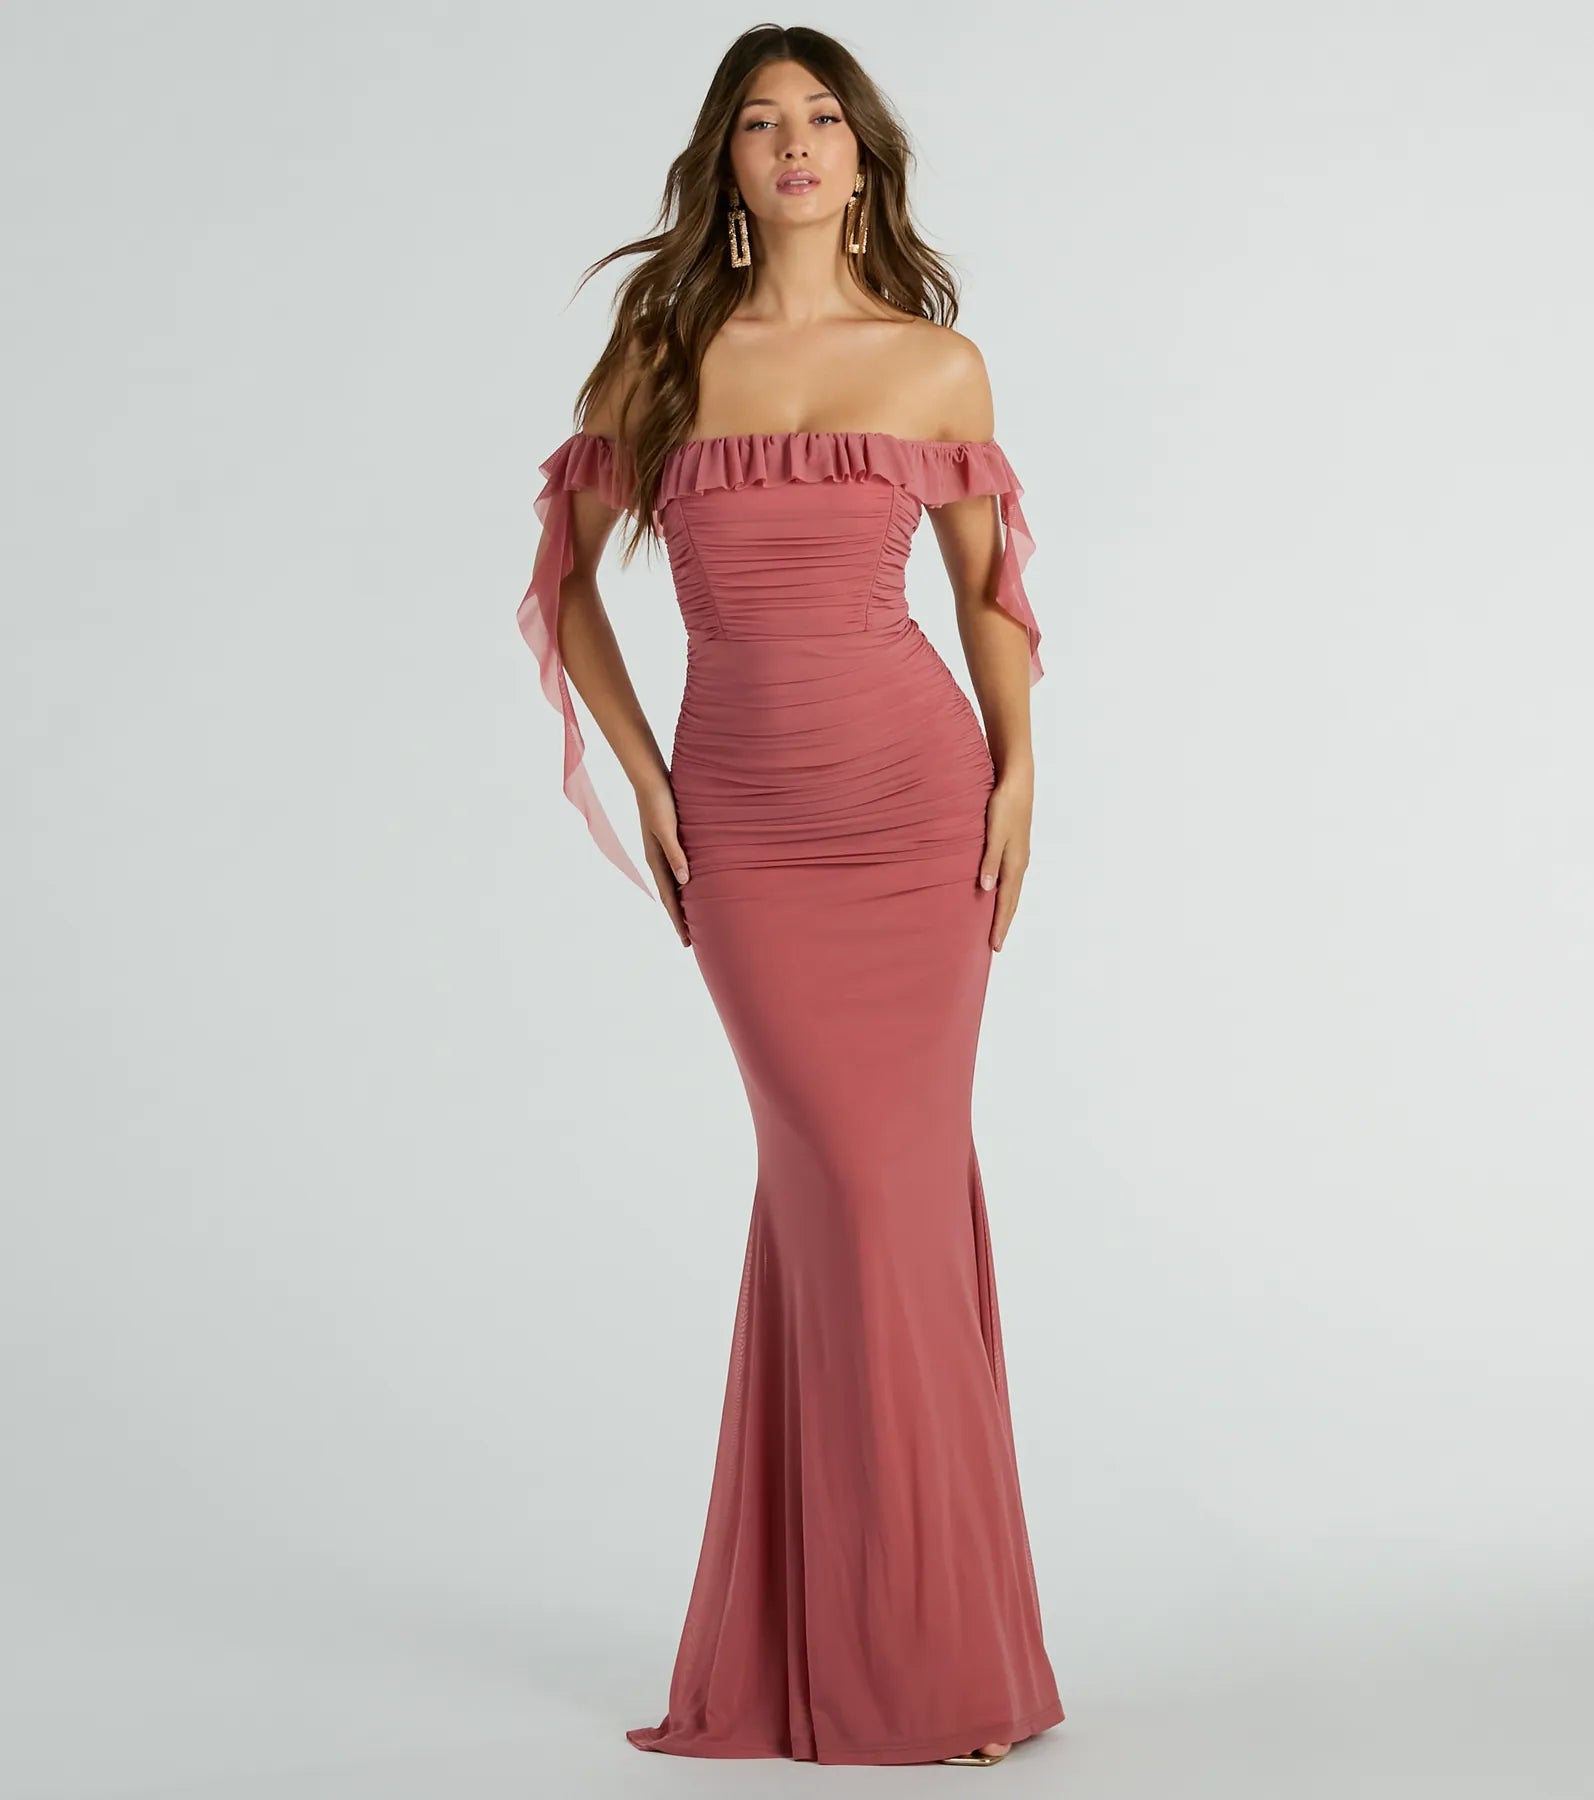 Sexy Sophisticated Mermaid Off the Shoulder Mesh Stretchy Ruched Knit Maxi Dress With Ruffles